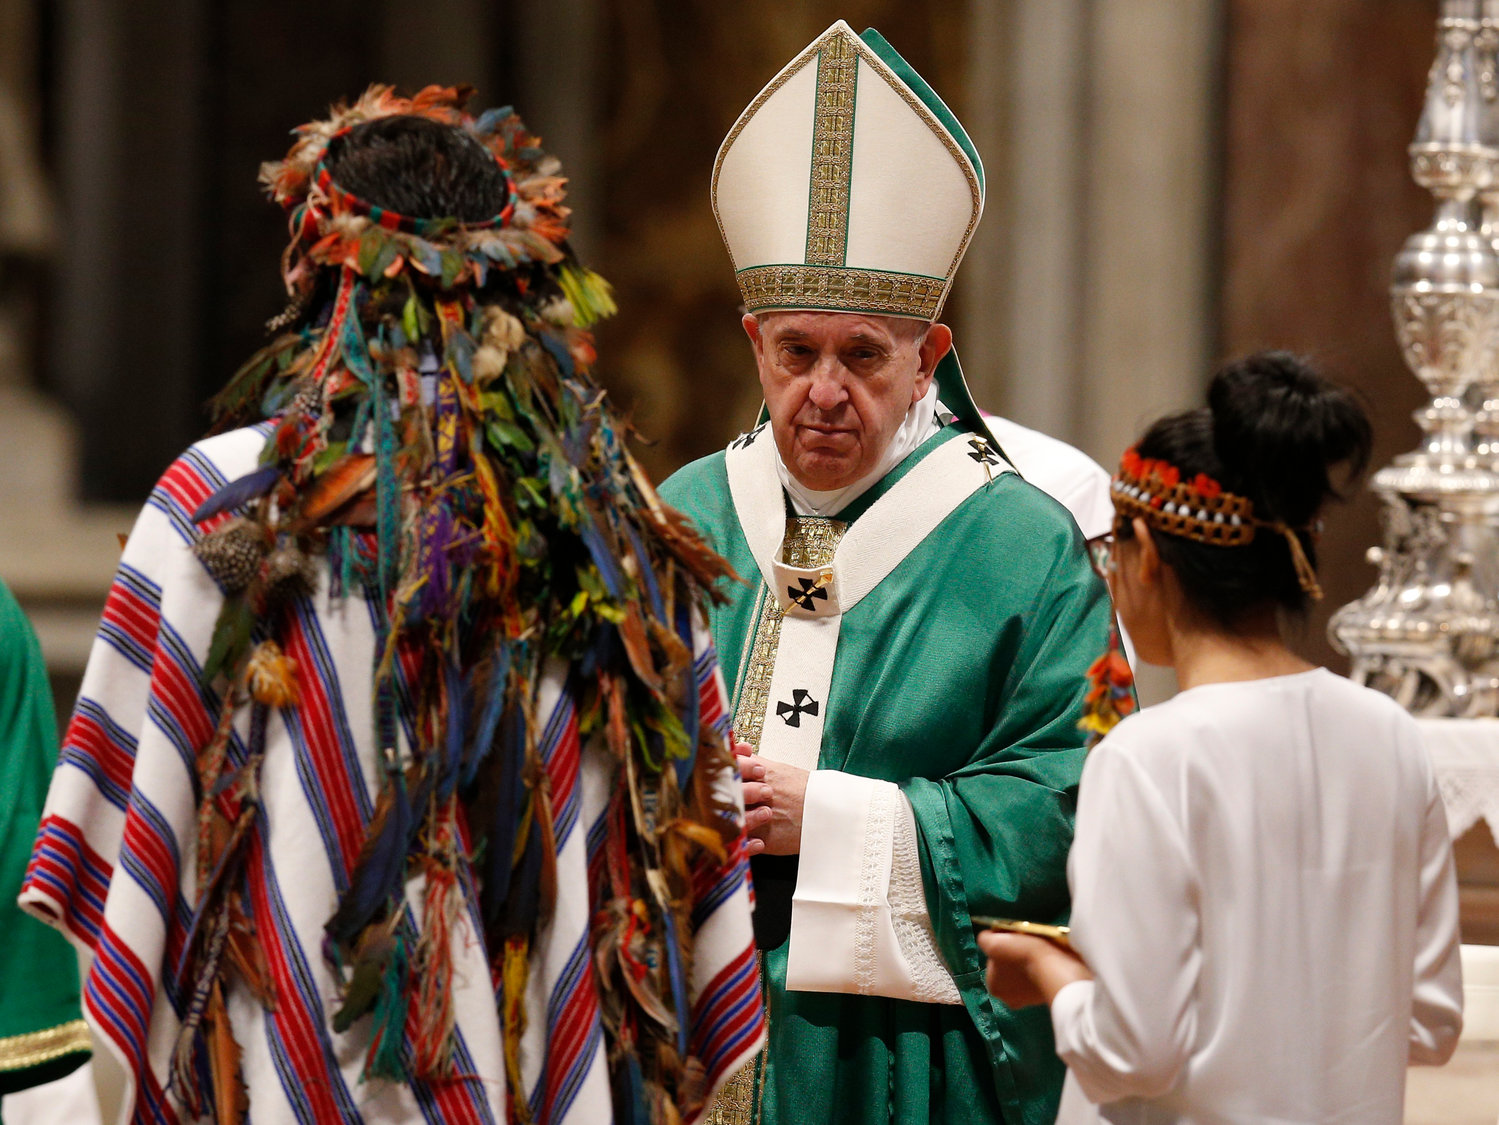 Pope Francis accepts offertory gifts from indigenous people as he celebrates the concluding Mass of the Synod of Bishops for the Amazon at the Vatican in this Oct. 27, 2019, file photo. The Vatican on Feb. 12 released the Pope’s apostolic exhortation, “Querida Amazonia” (Beloved Amazonia), which offers his conclusions from the synod.